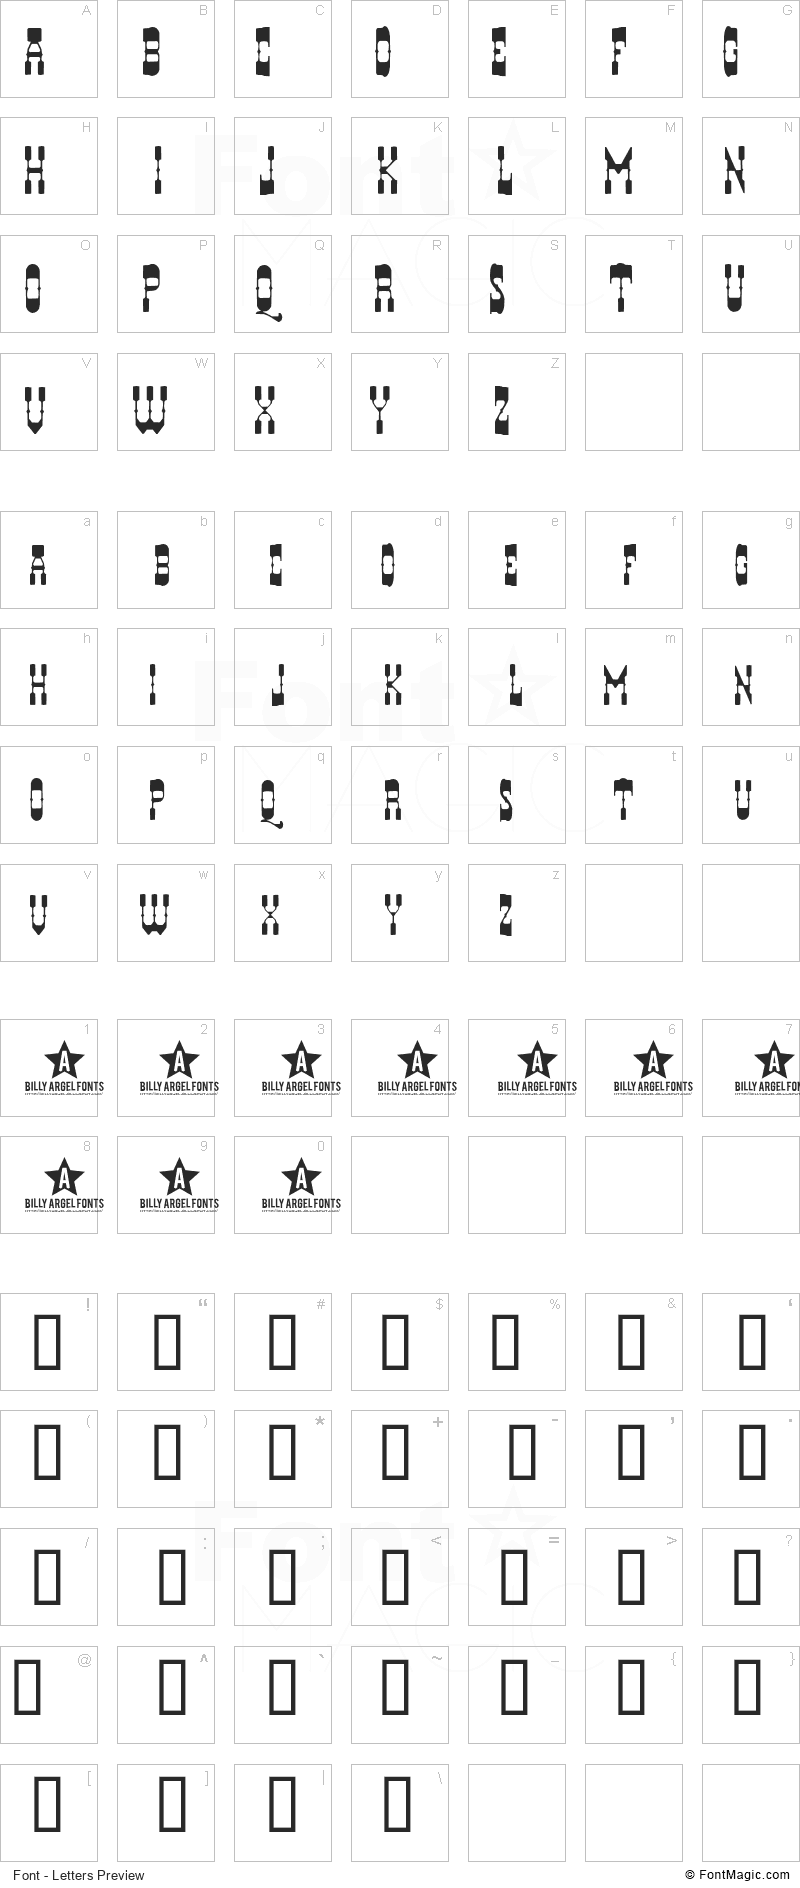 Hyerba Font - All Latters Preview Chart